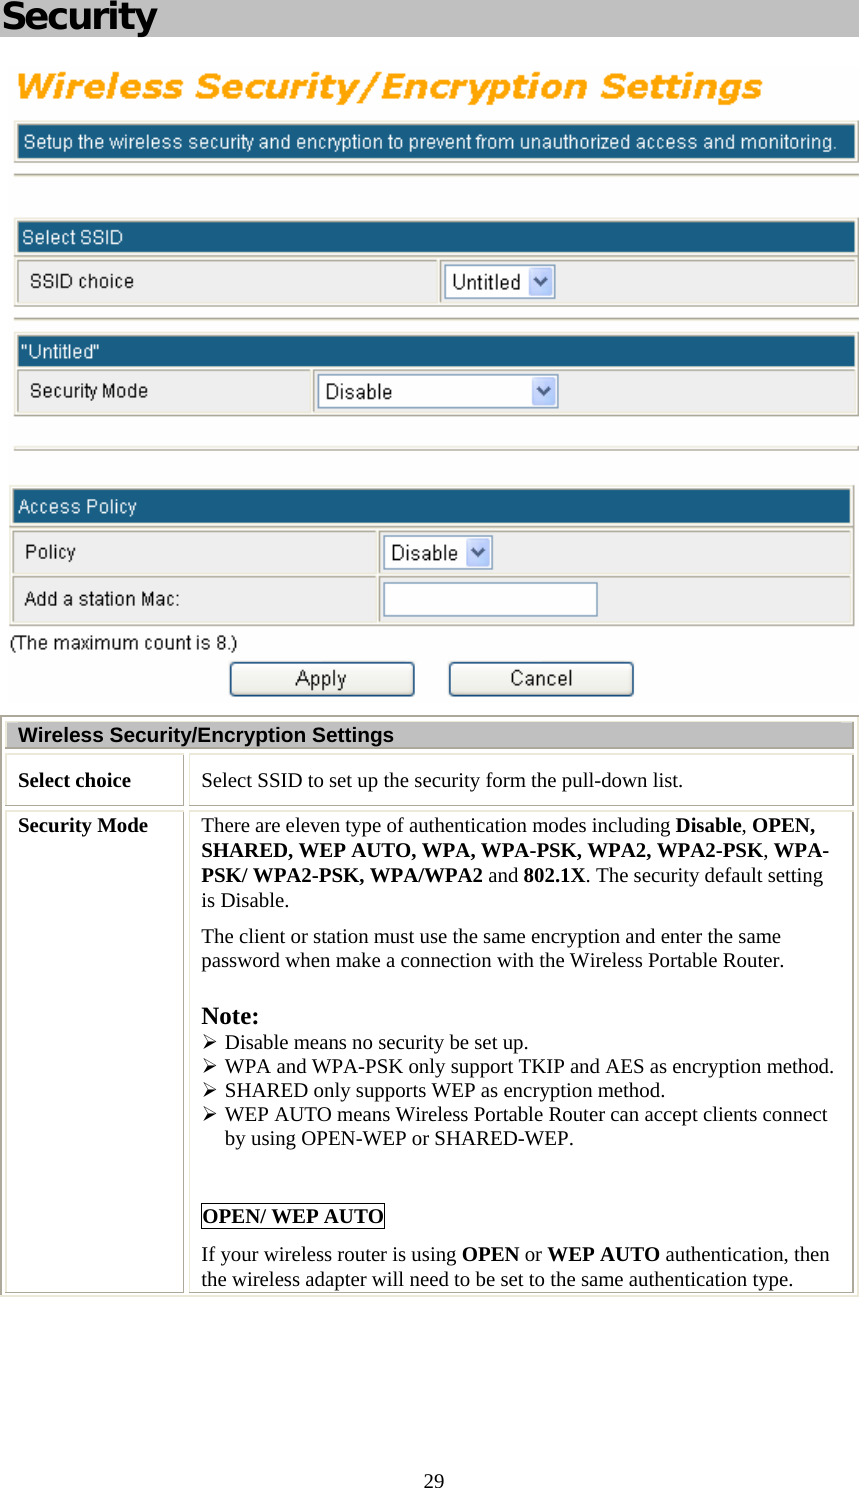   29Security  Wireless Security/Encryption Settings Select choice  Select SSID to set up the security form the pull-down list. Security Mode  There are eleven type of authentication modes including Disable, OPEN, SHARED, WEP AUTO, WPA, WPA-PSK, WPA2, WPA2-PSK, WPA-PSK/ WPA2-PSK, WPA/WPA2 and 802.1X. The security default setting is Disable. The client or station must use the same encryption and enter the same password when make a connection with the Wireless Portable Router. Note:  ¾ Disable means no security be set up. ¾ WPA and WPA-PSK only support TKIP and AES as encryption method. ¾ SHARED only supports WEP as encryption method. ¾ WEP AUTO means Wireless Portable Router can accept clients connect by using OPEN-WEP or SHARED-WEP.  OPEN/ WEP AUTO If your wireless router is using OPEN or WEP AUTO authentication, then the wireless adapter will need to be set to the same authentication type.  